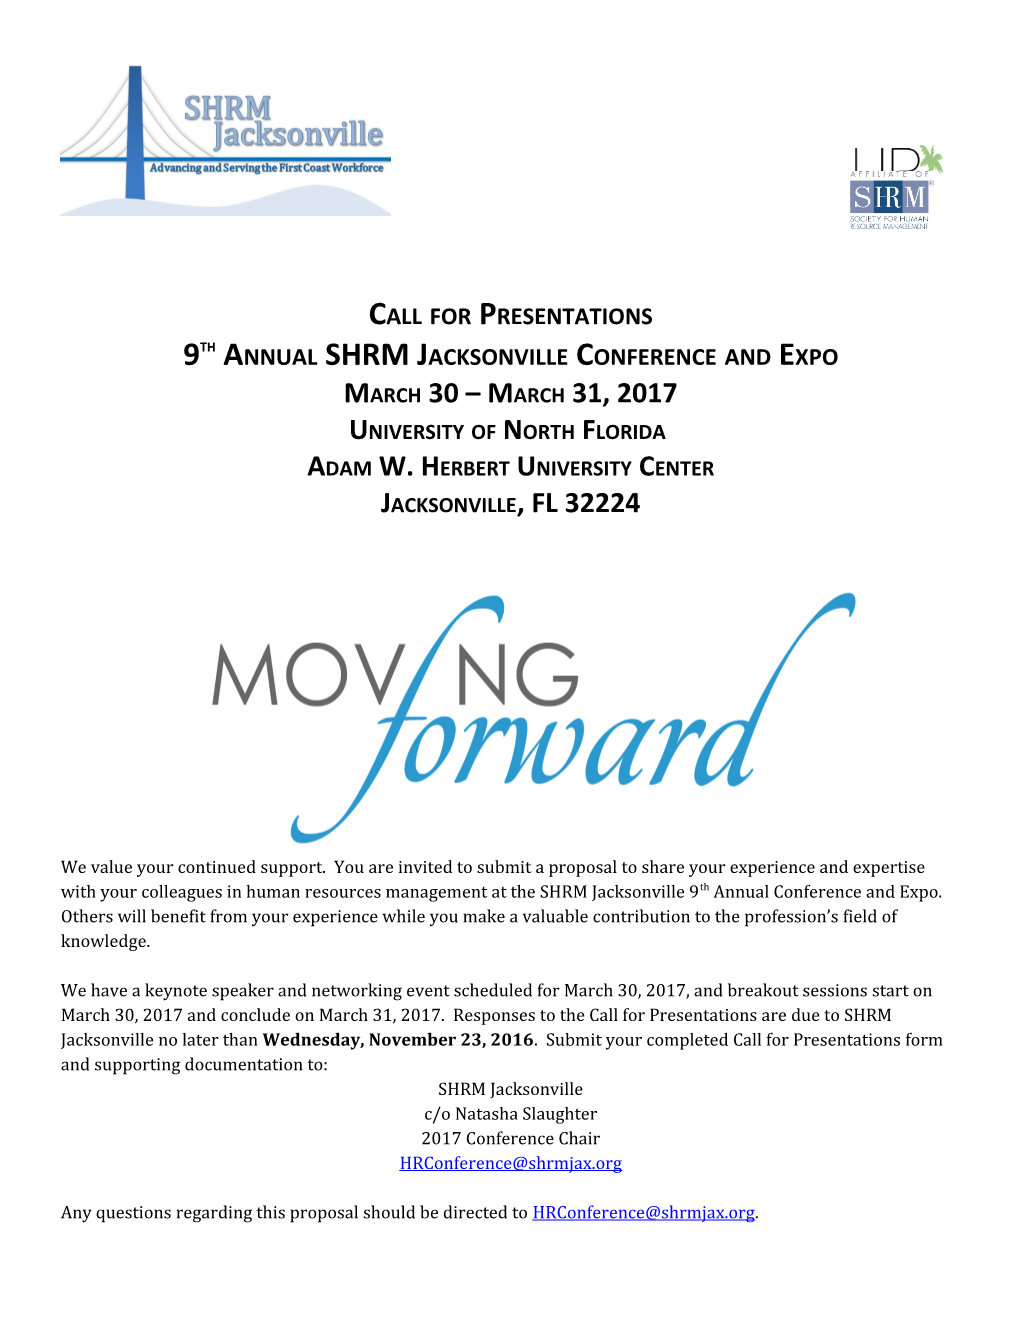 9Th Annual SHRM Jacksonville Conference and Expo